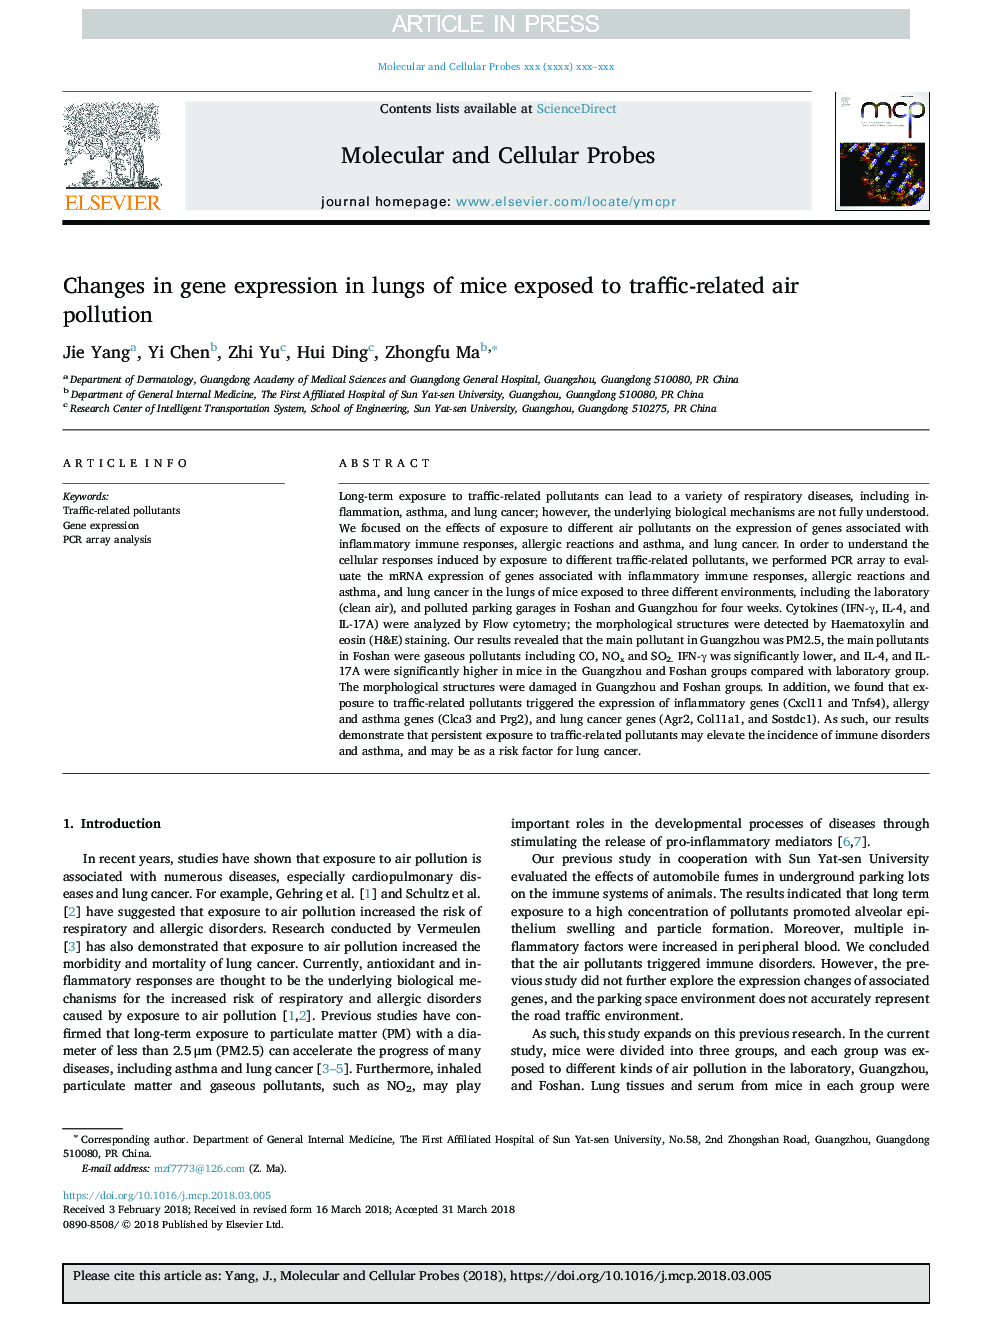 Changes in gene expression in lungs of mice exposed to traffic-related air pollution